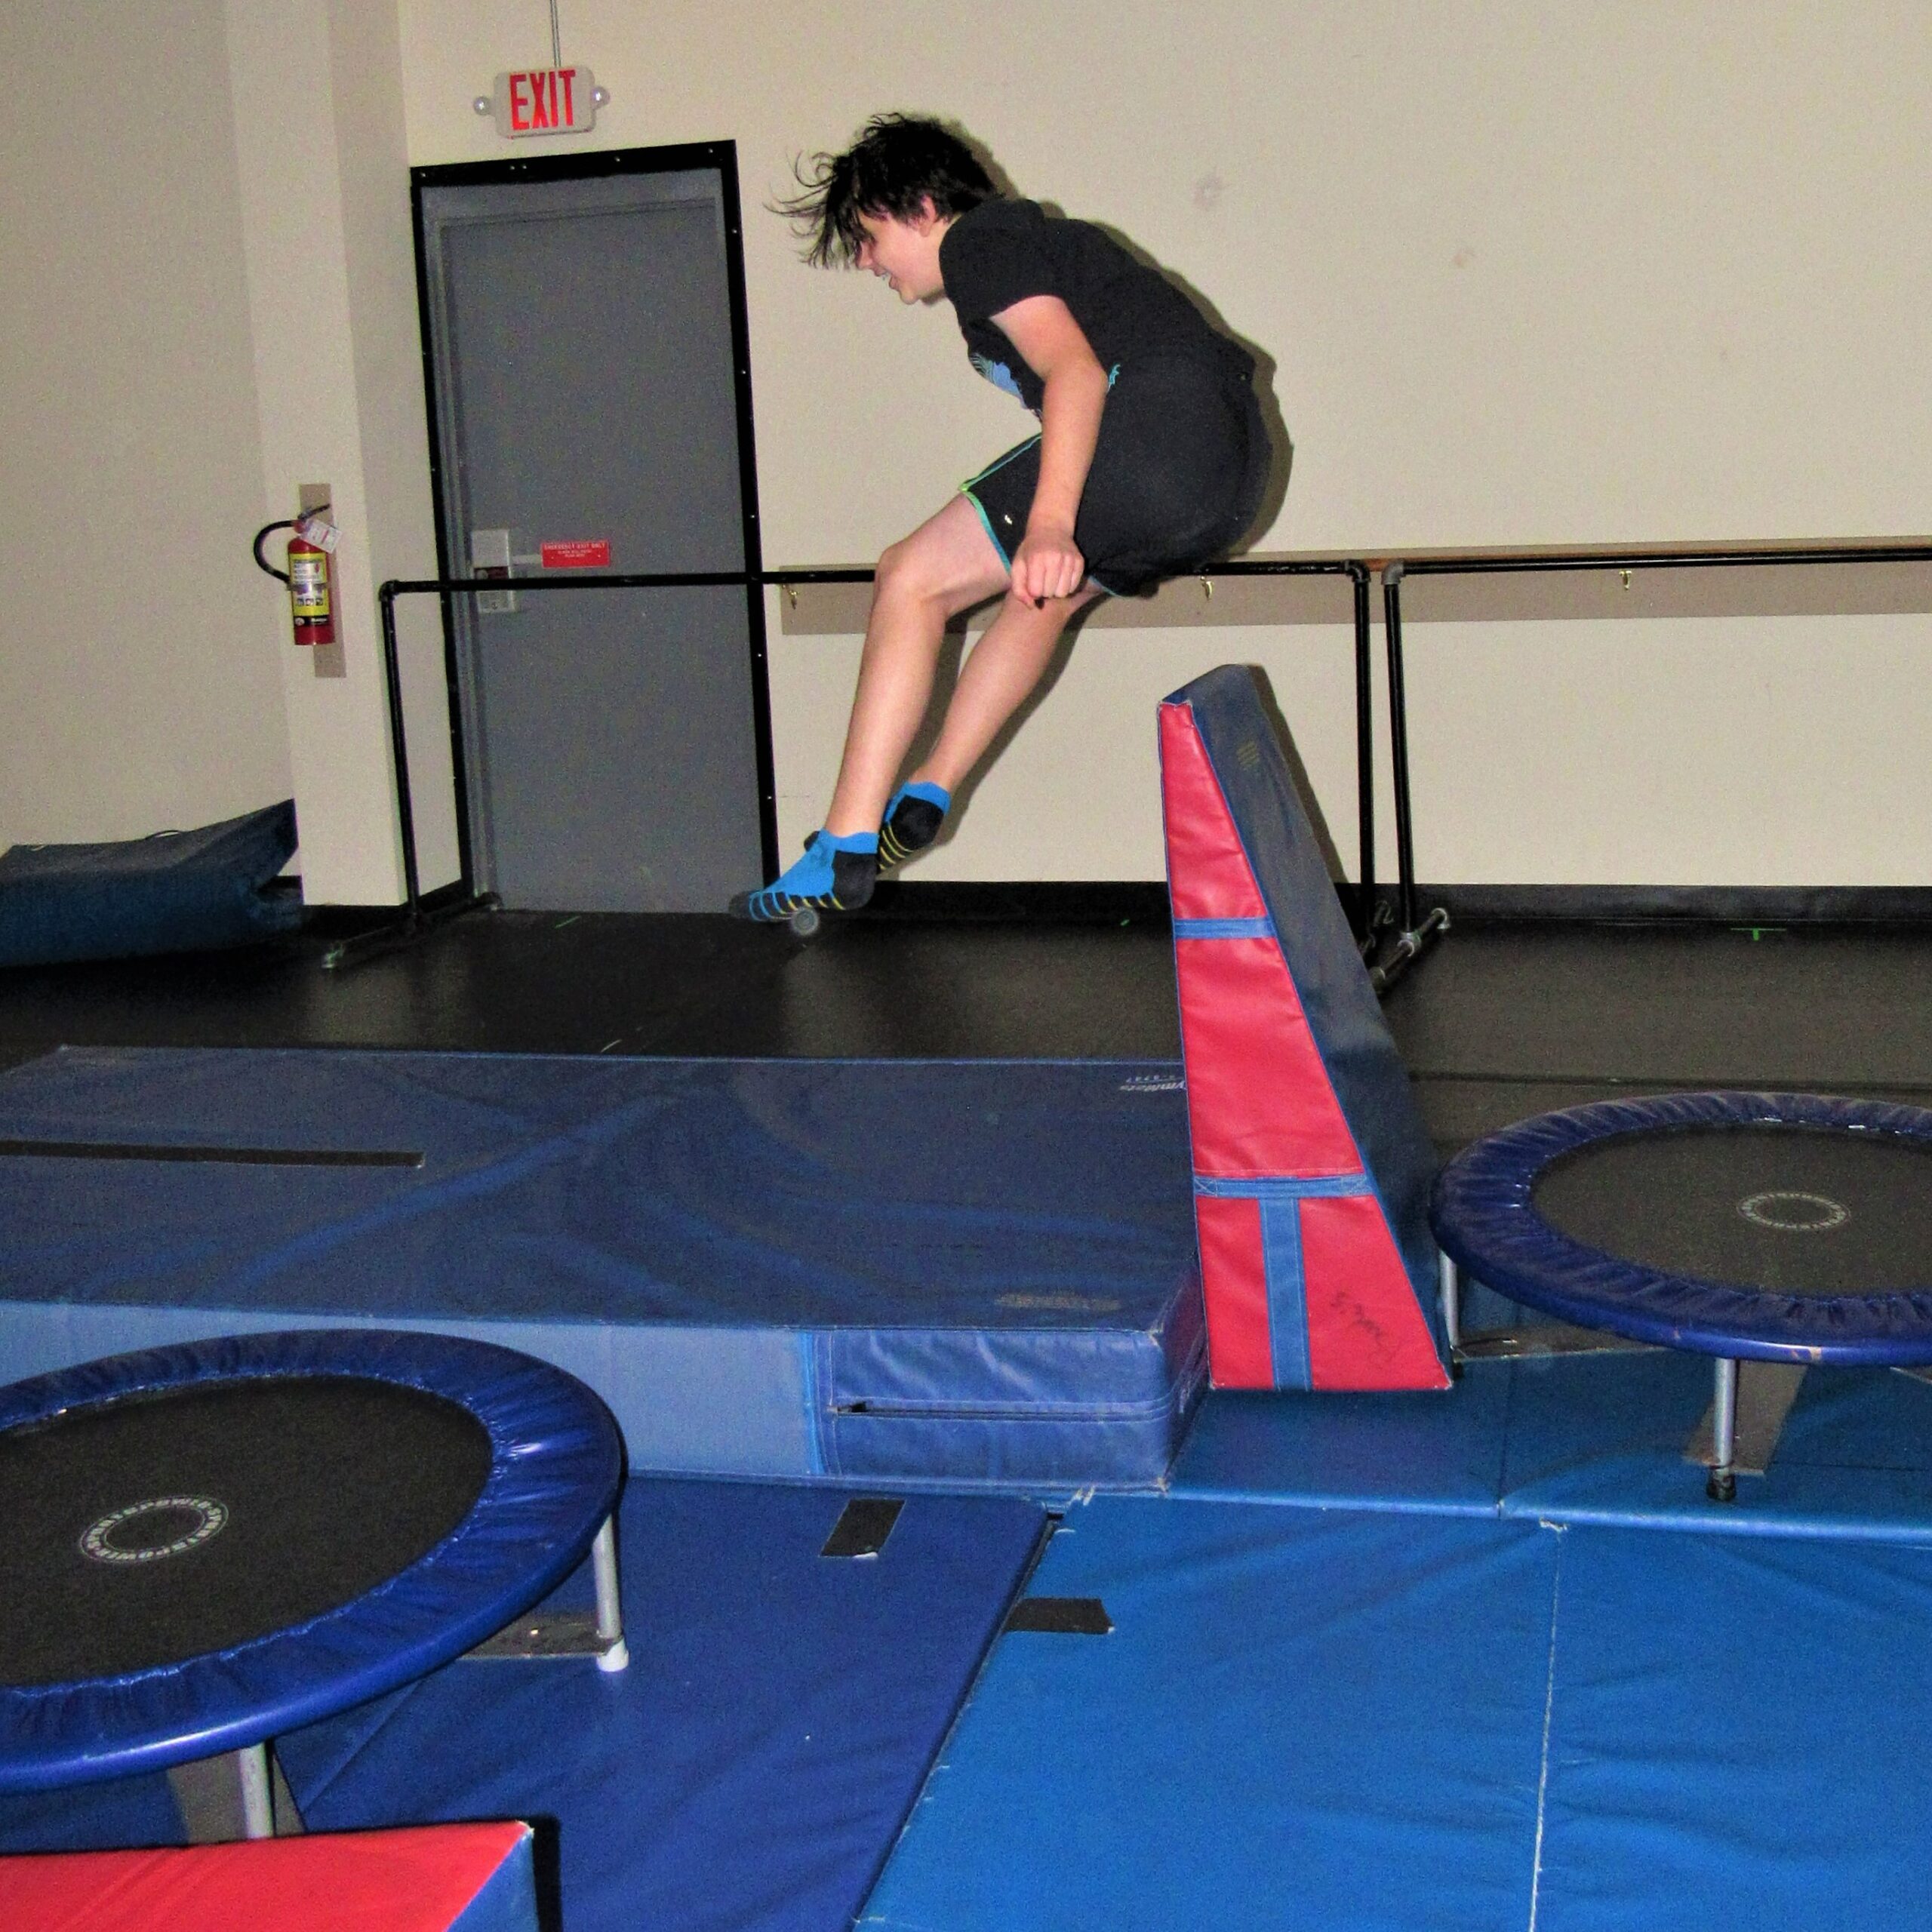 Boy jumping over obstacle